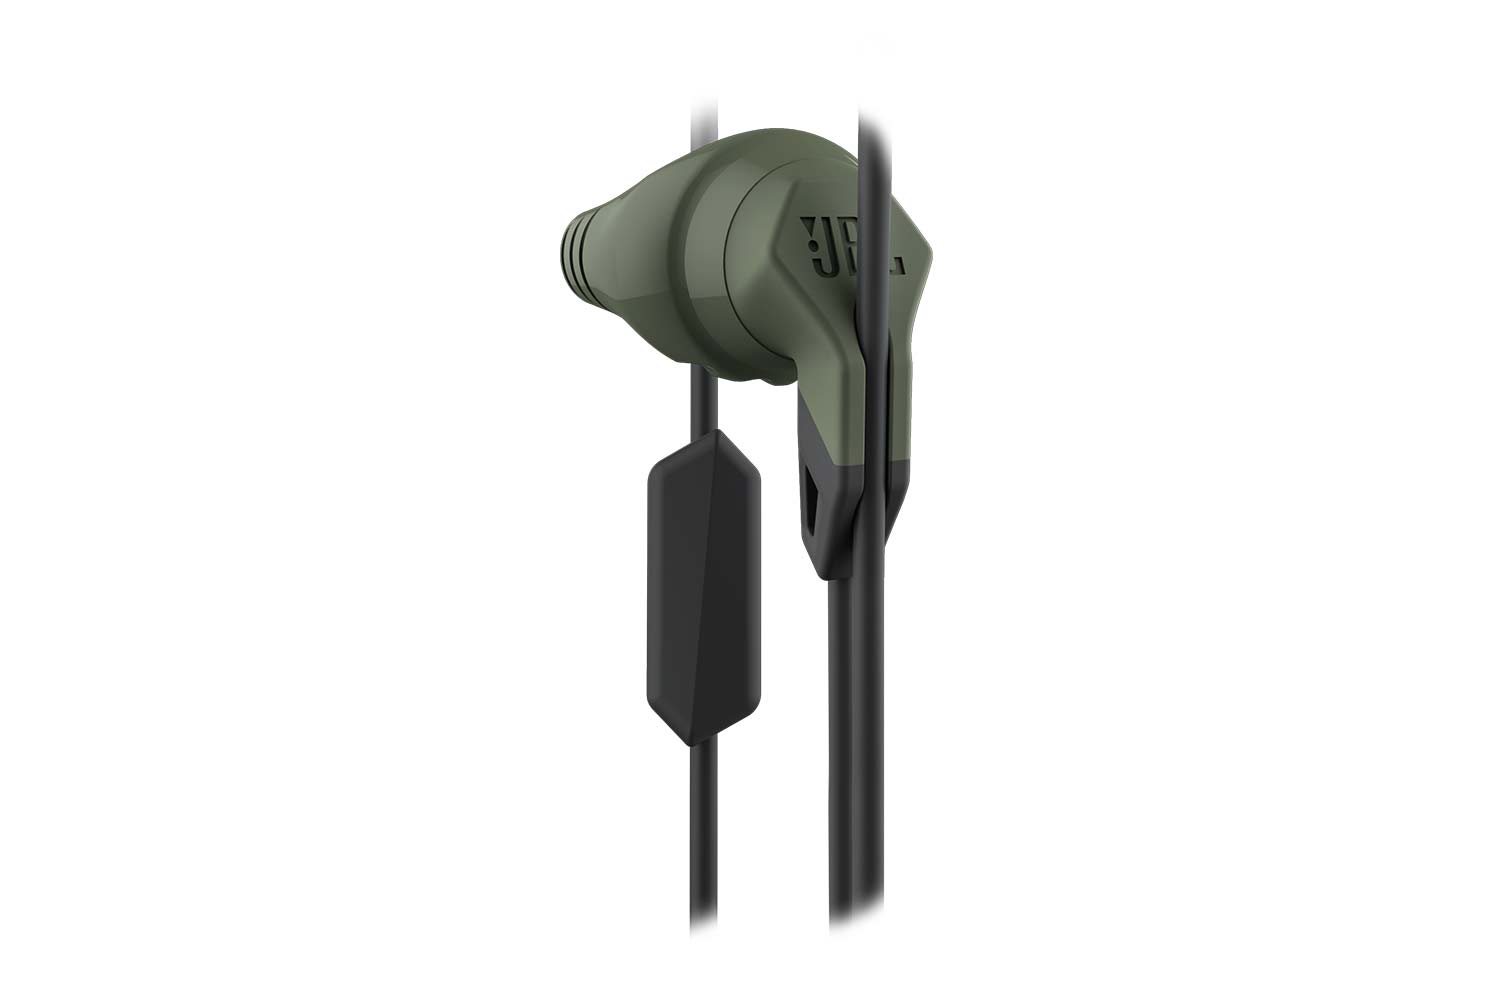 jbl new headphones ifa everest reflect grip noise cancelling bluetooth small 200 olive cordpinch